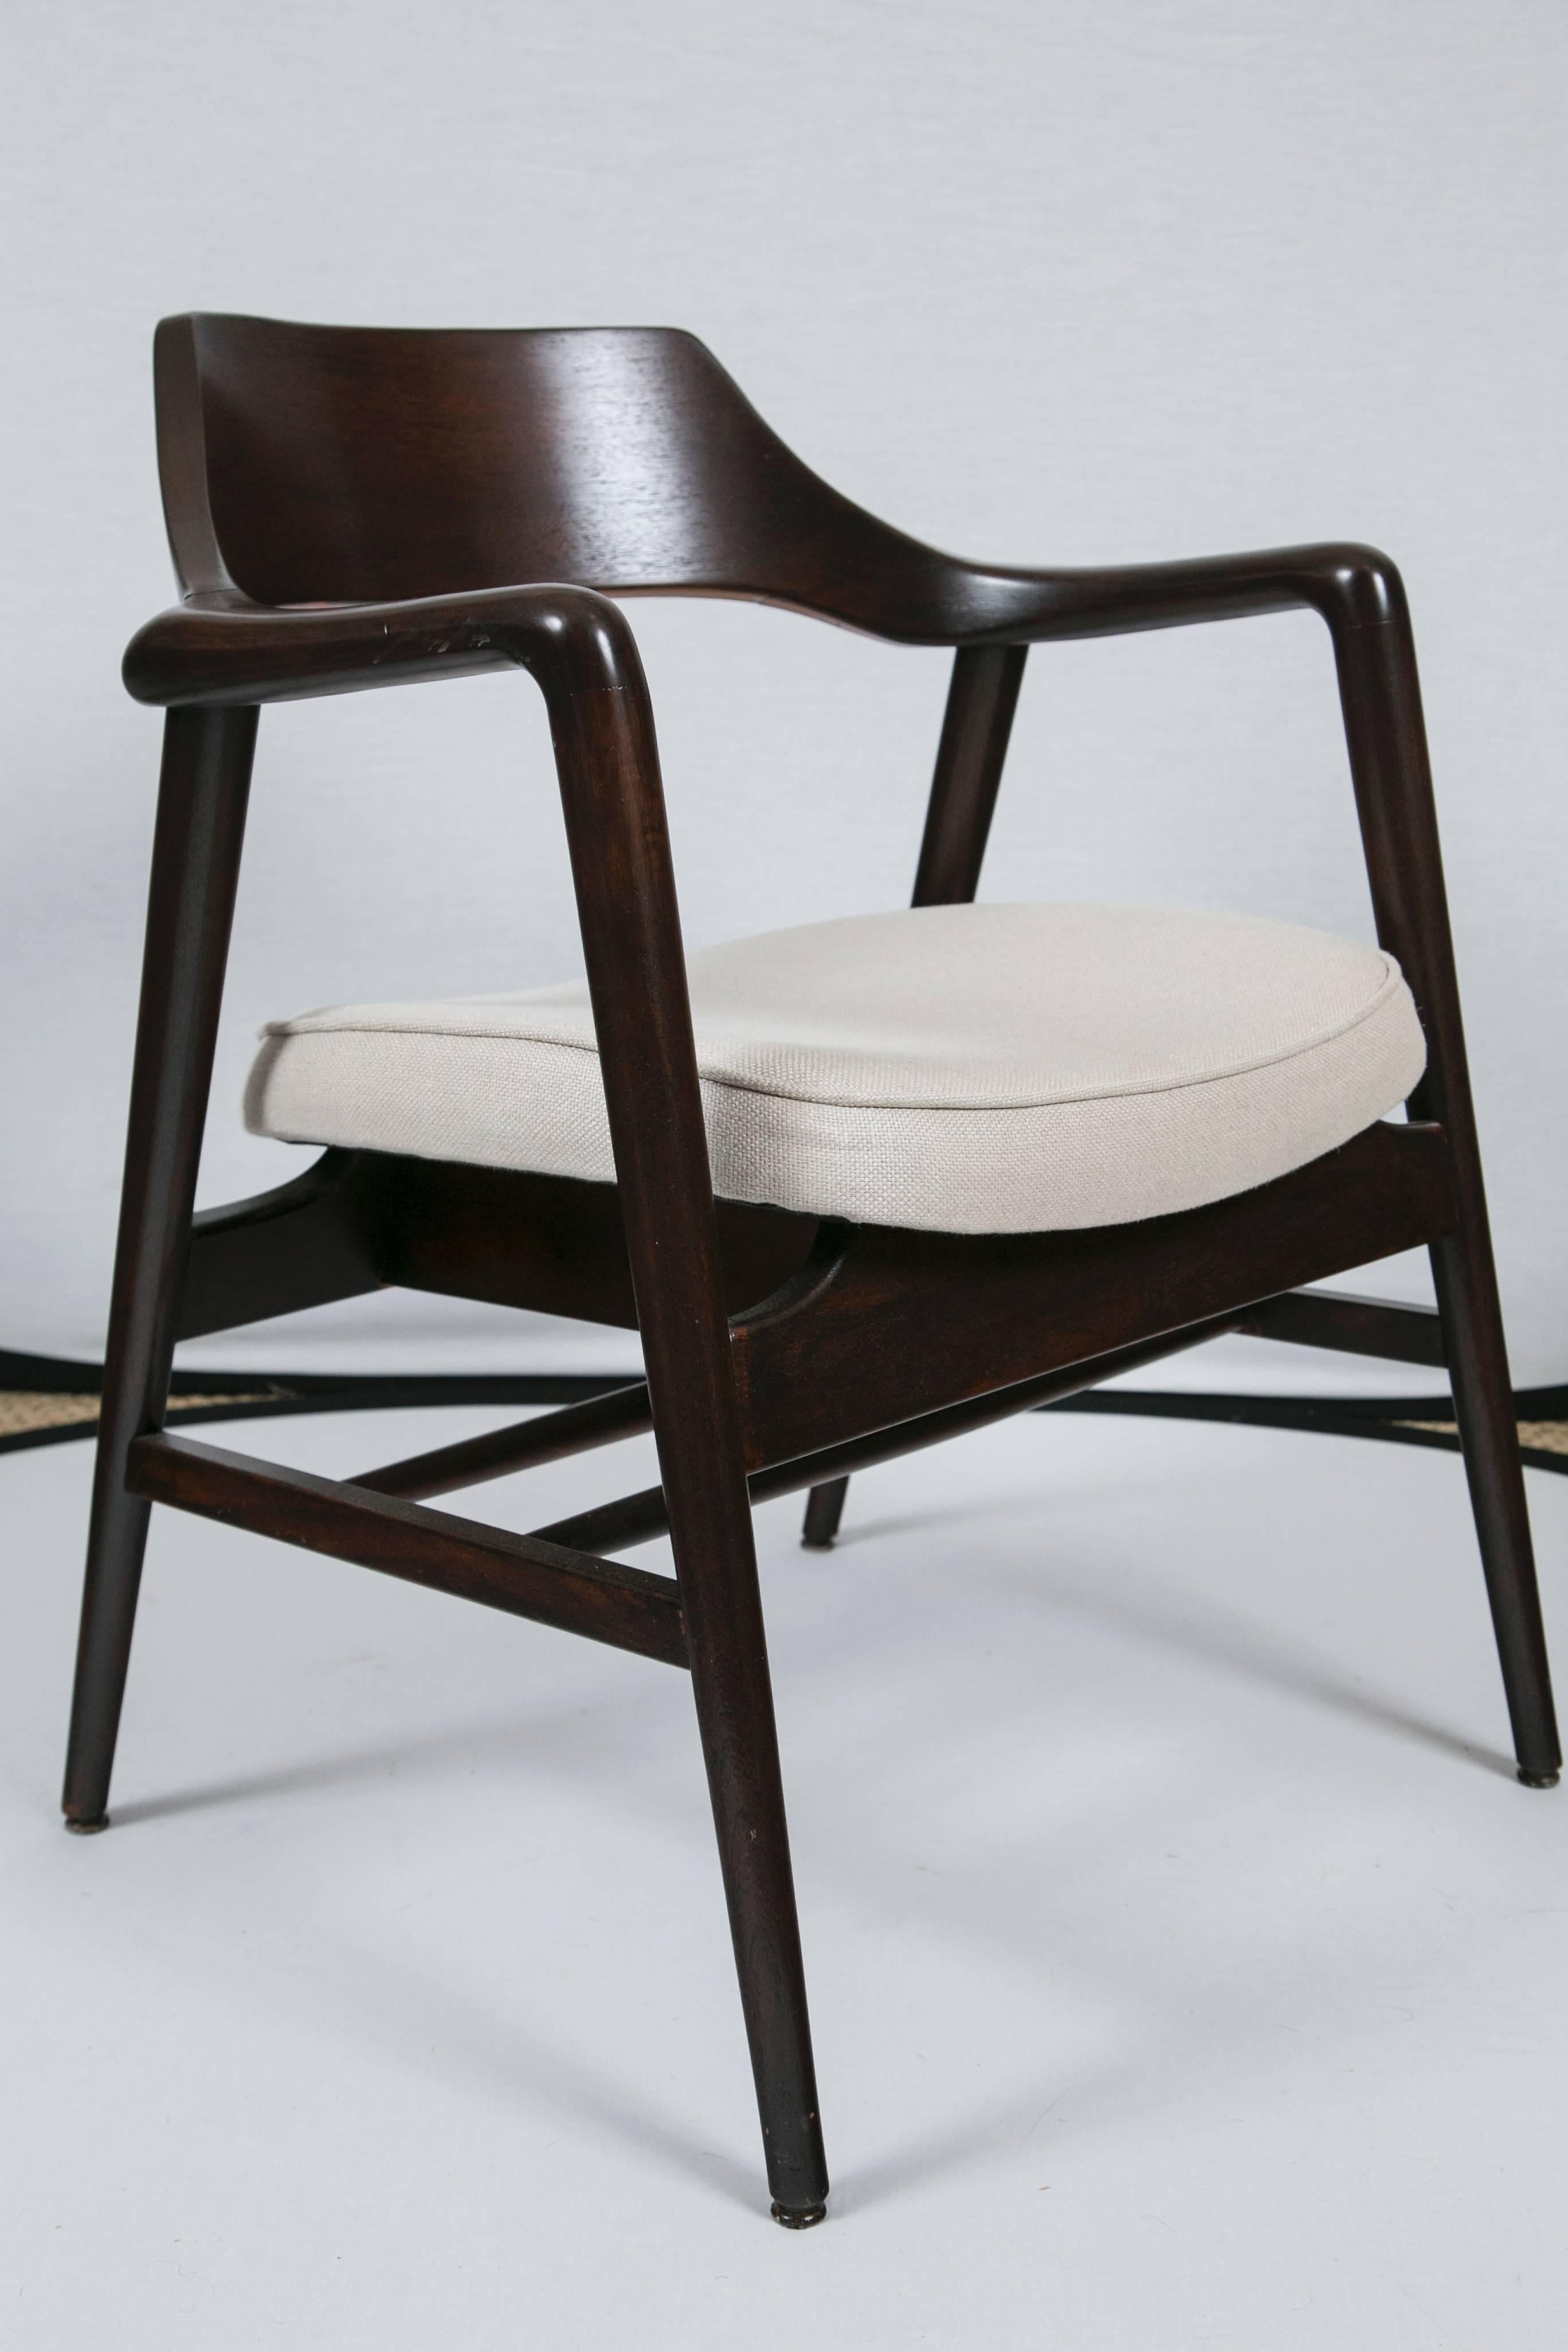 Richly inspired by Danish design, this American crafted Gunlocke armchair speaks volumes for quality and aesthetic. The walnut frame is newly refinished in a wonderful dark chocolate stain. We have also upholstered the seat with a high quality linen